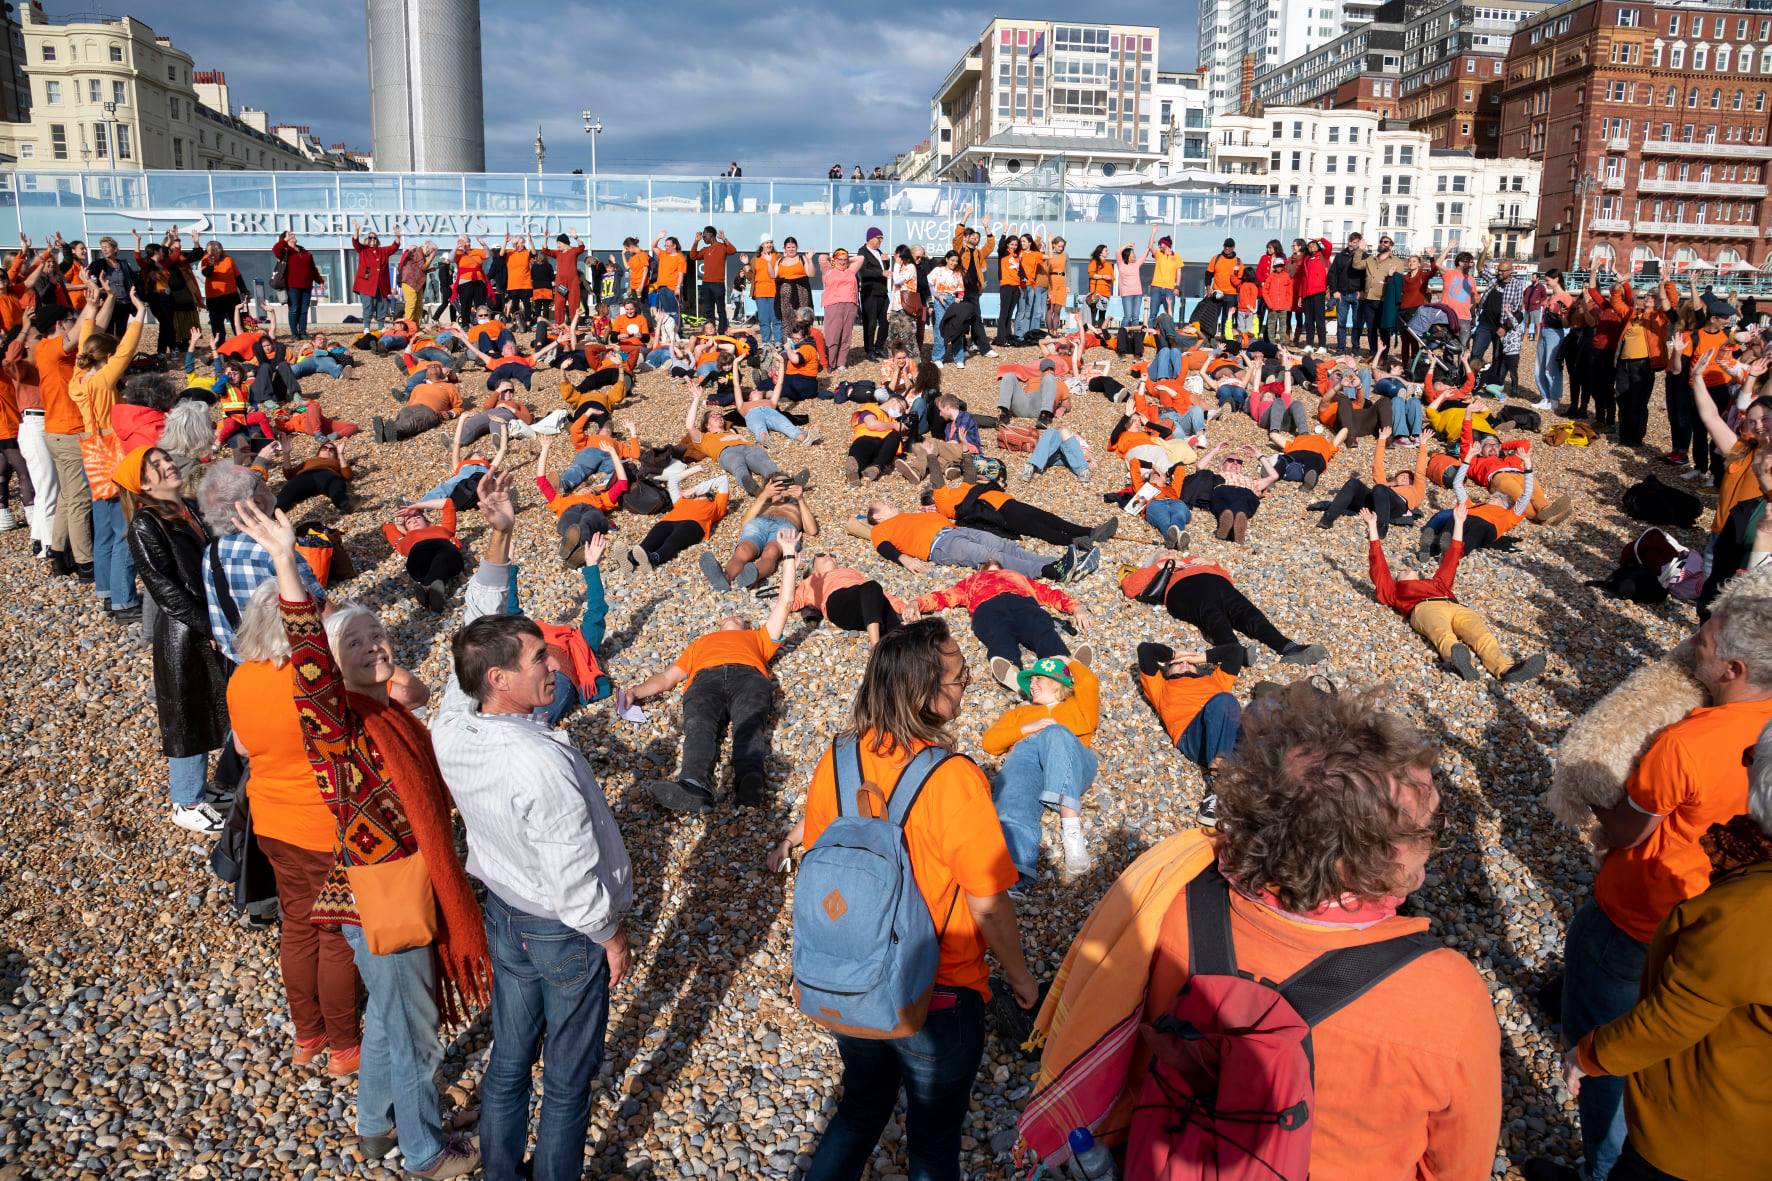 People laying down on the sand, wearing orange